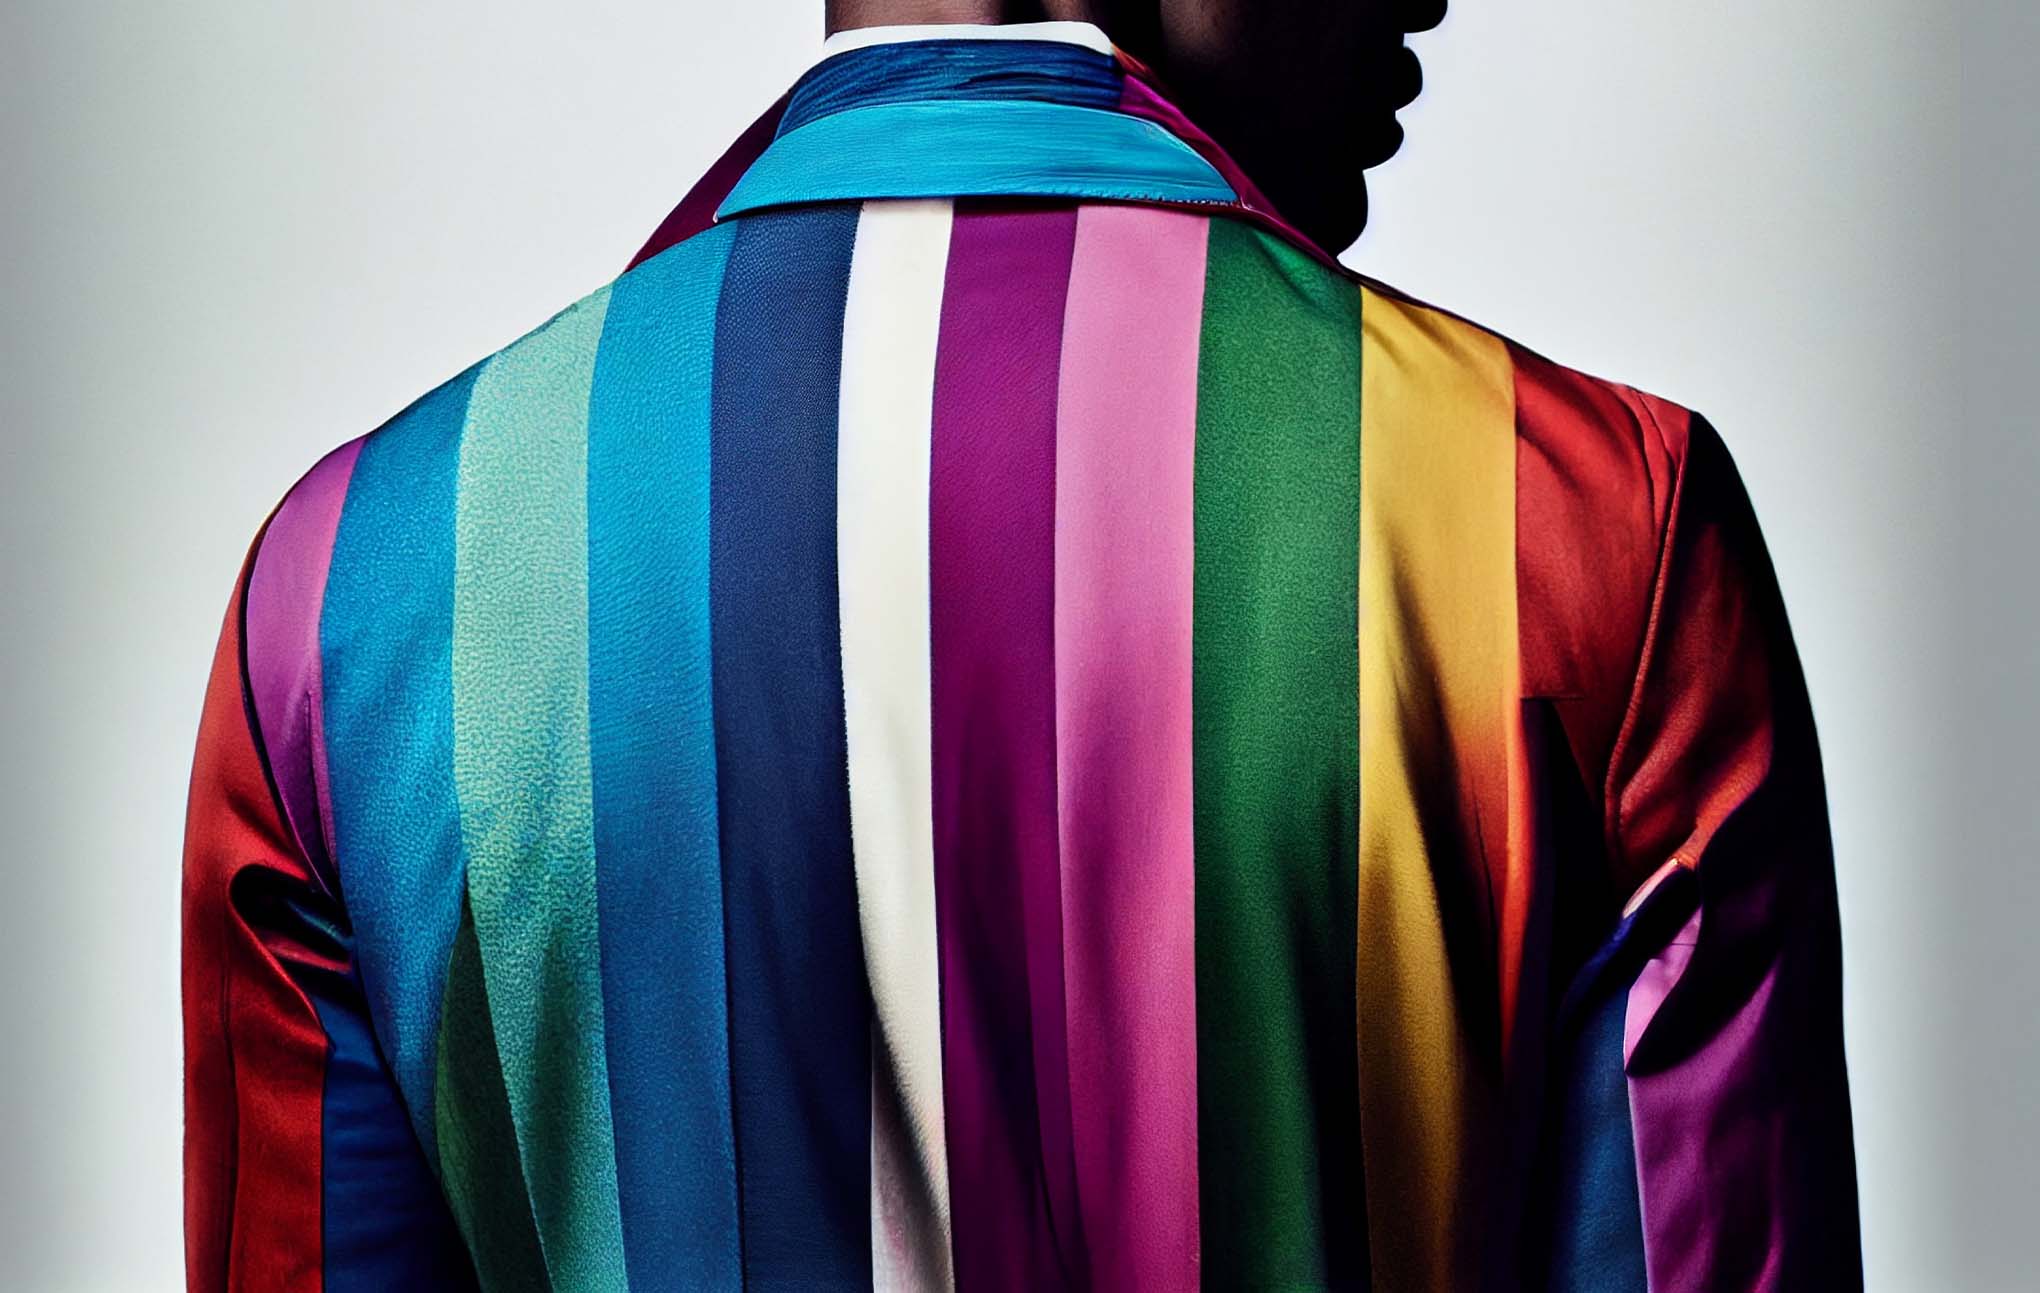 A man is seen from behind wearing a vibrant, multicolored striped blazer with shades of blue, green, pink, and red, set against a soft gray background. the focus is on the sharp details of the tailored jacket and the bold color stripes.